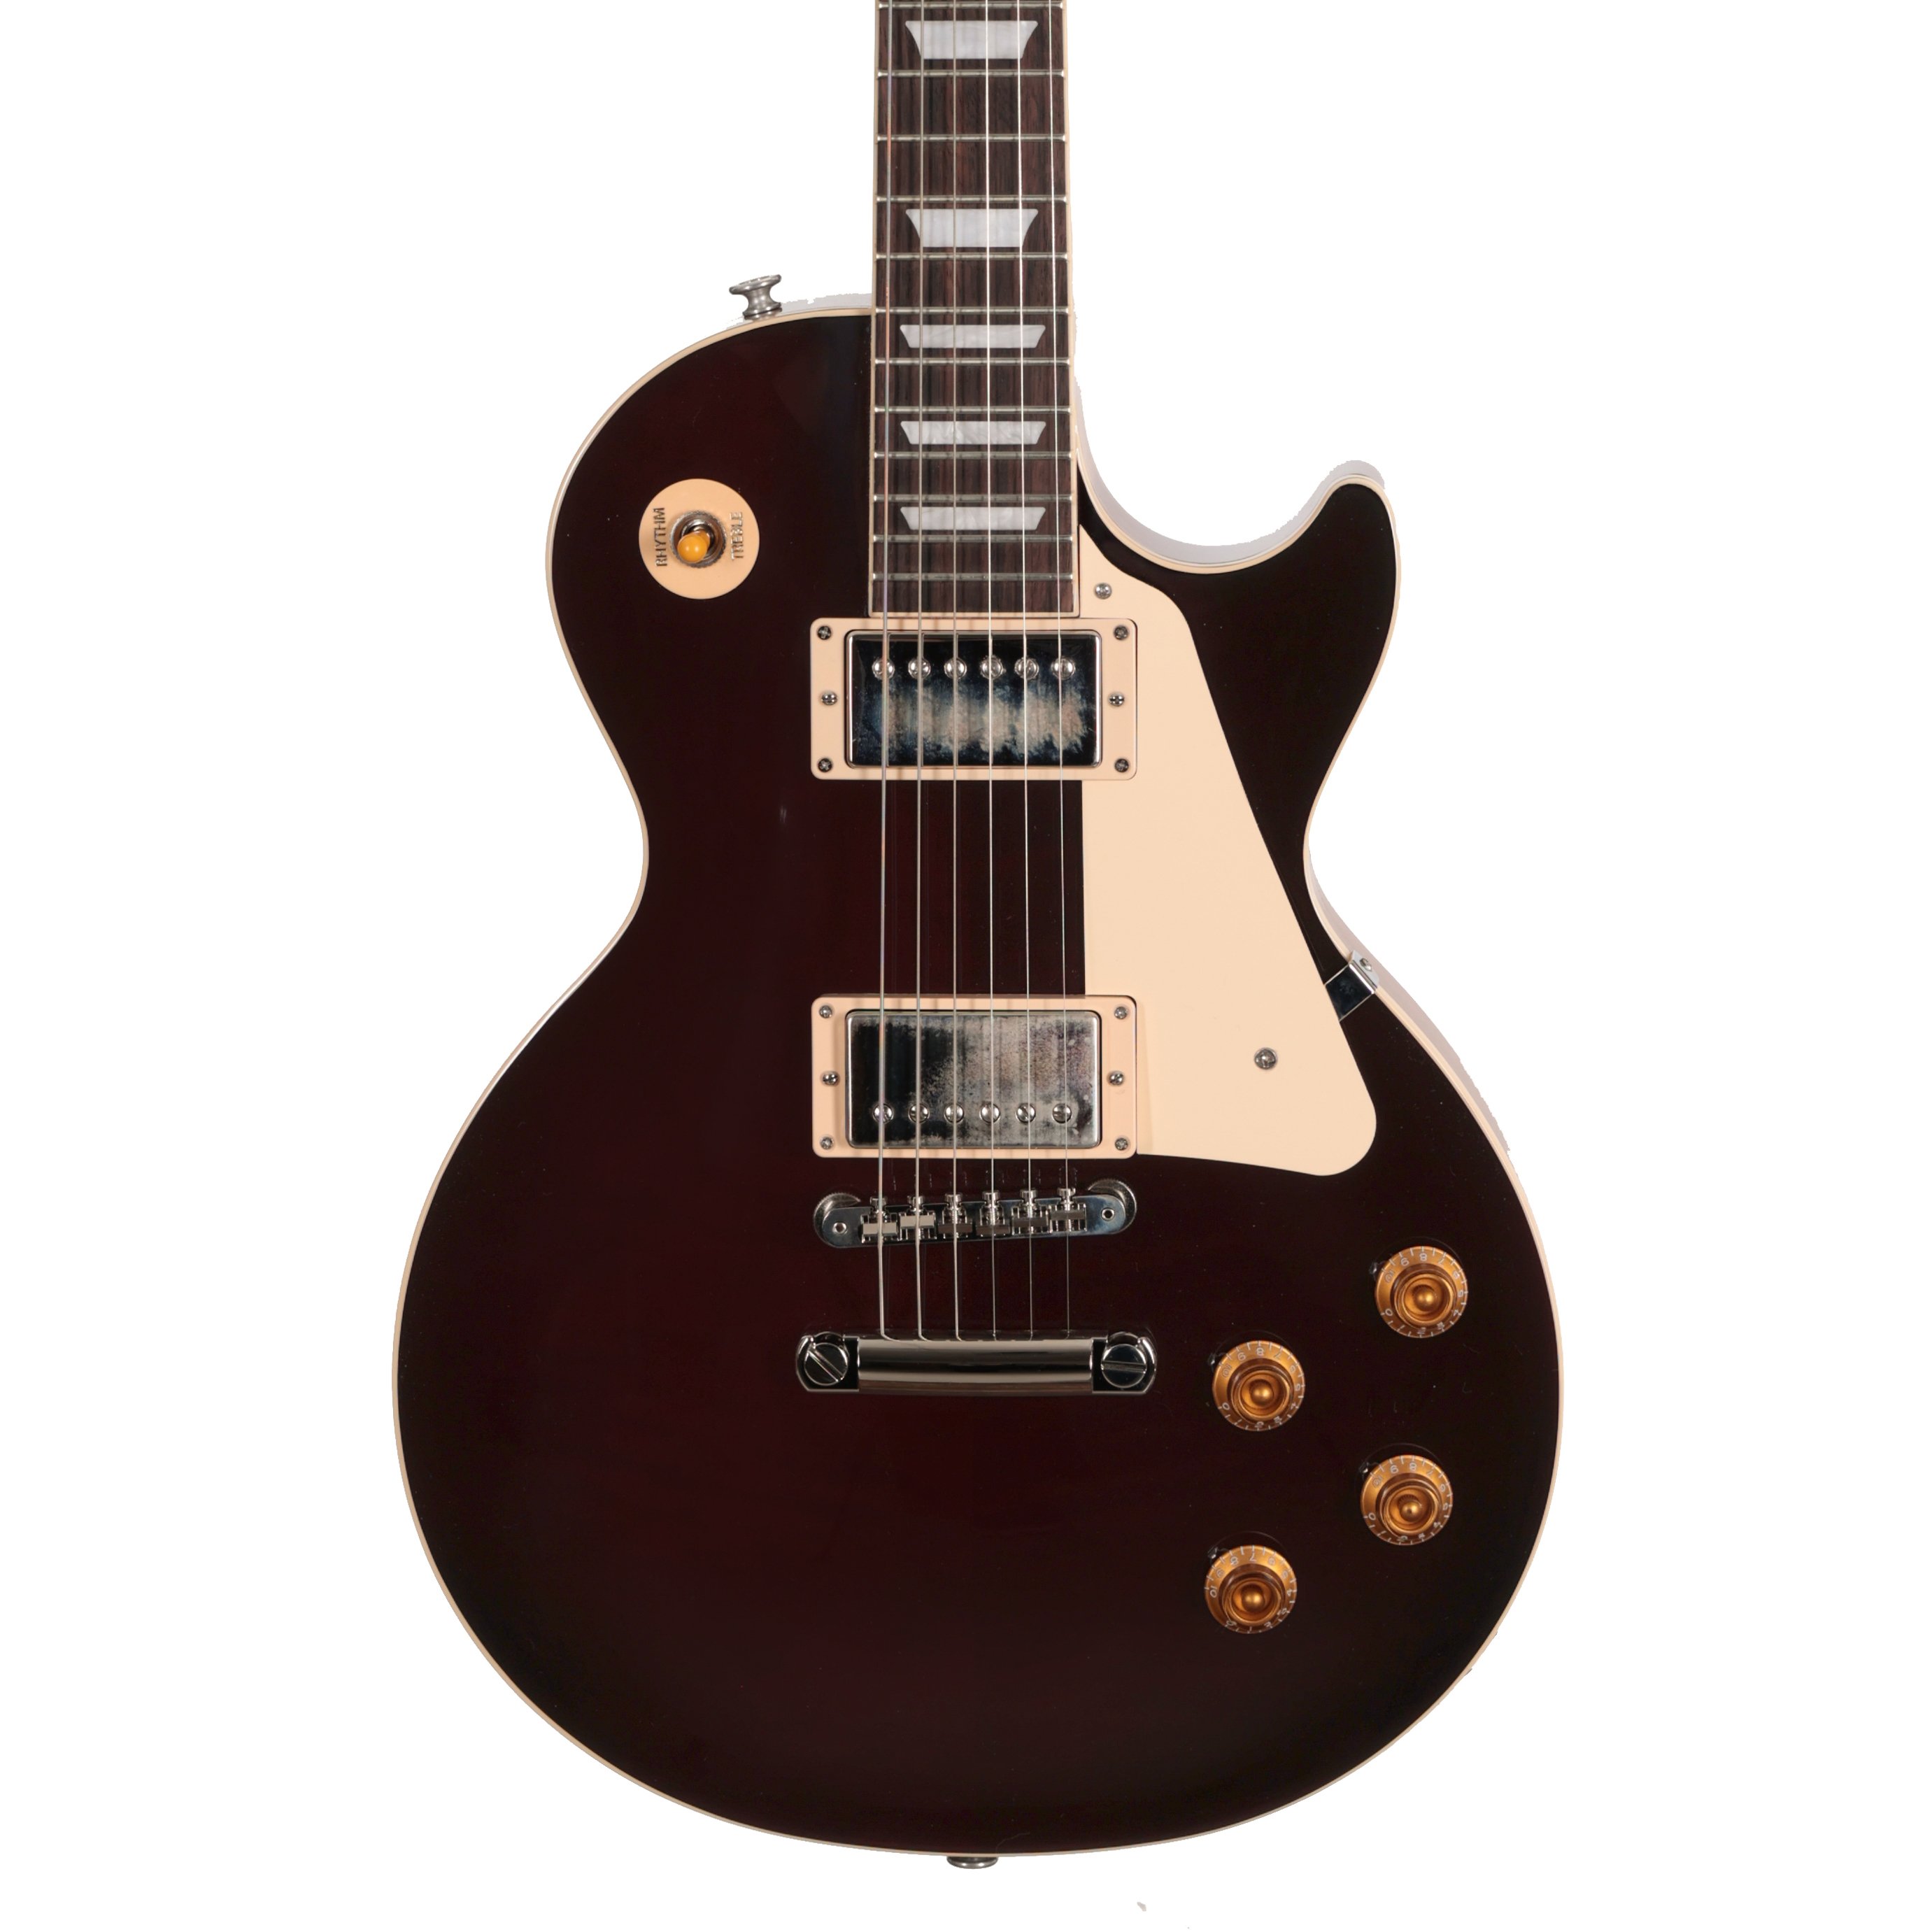 Gibson USA Les Paul Standard 50s Electric Guitar in Transparent Oxblood